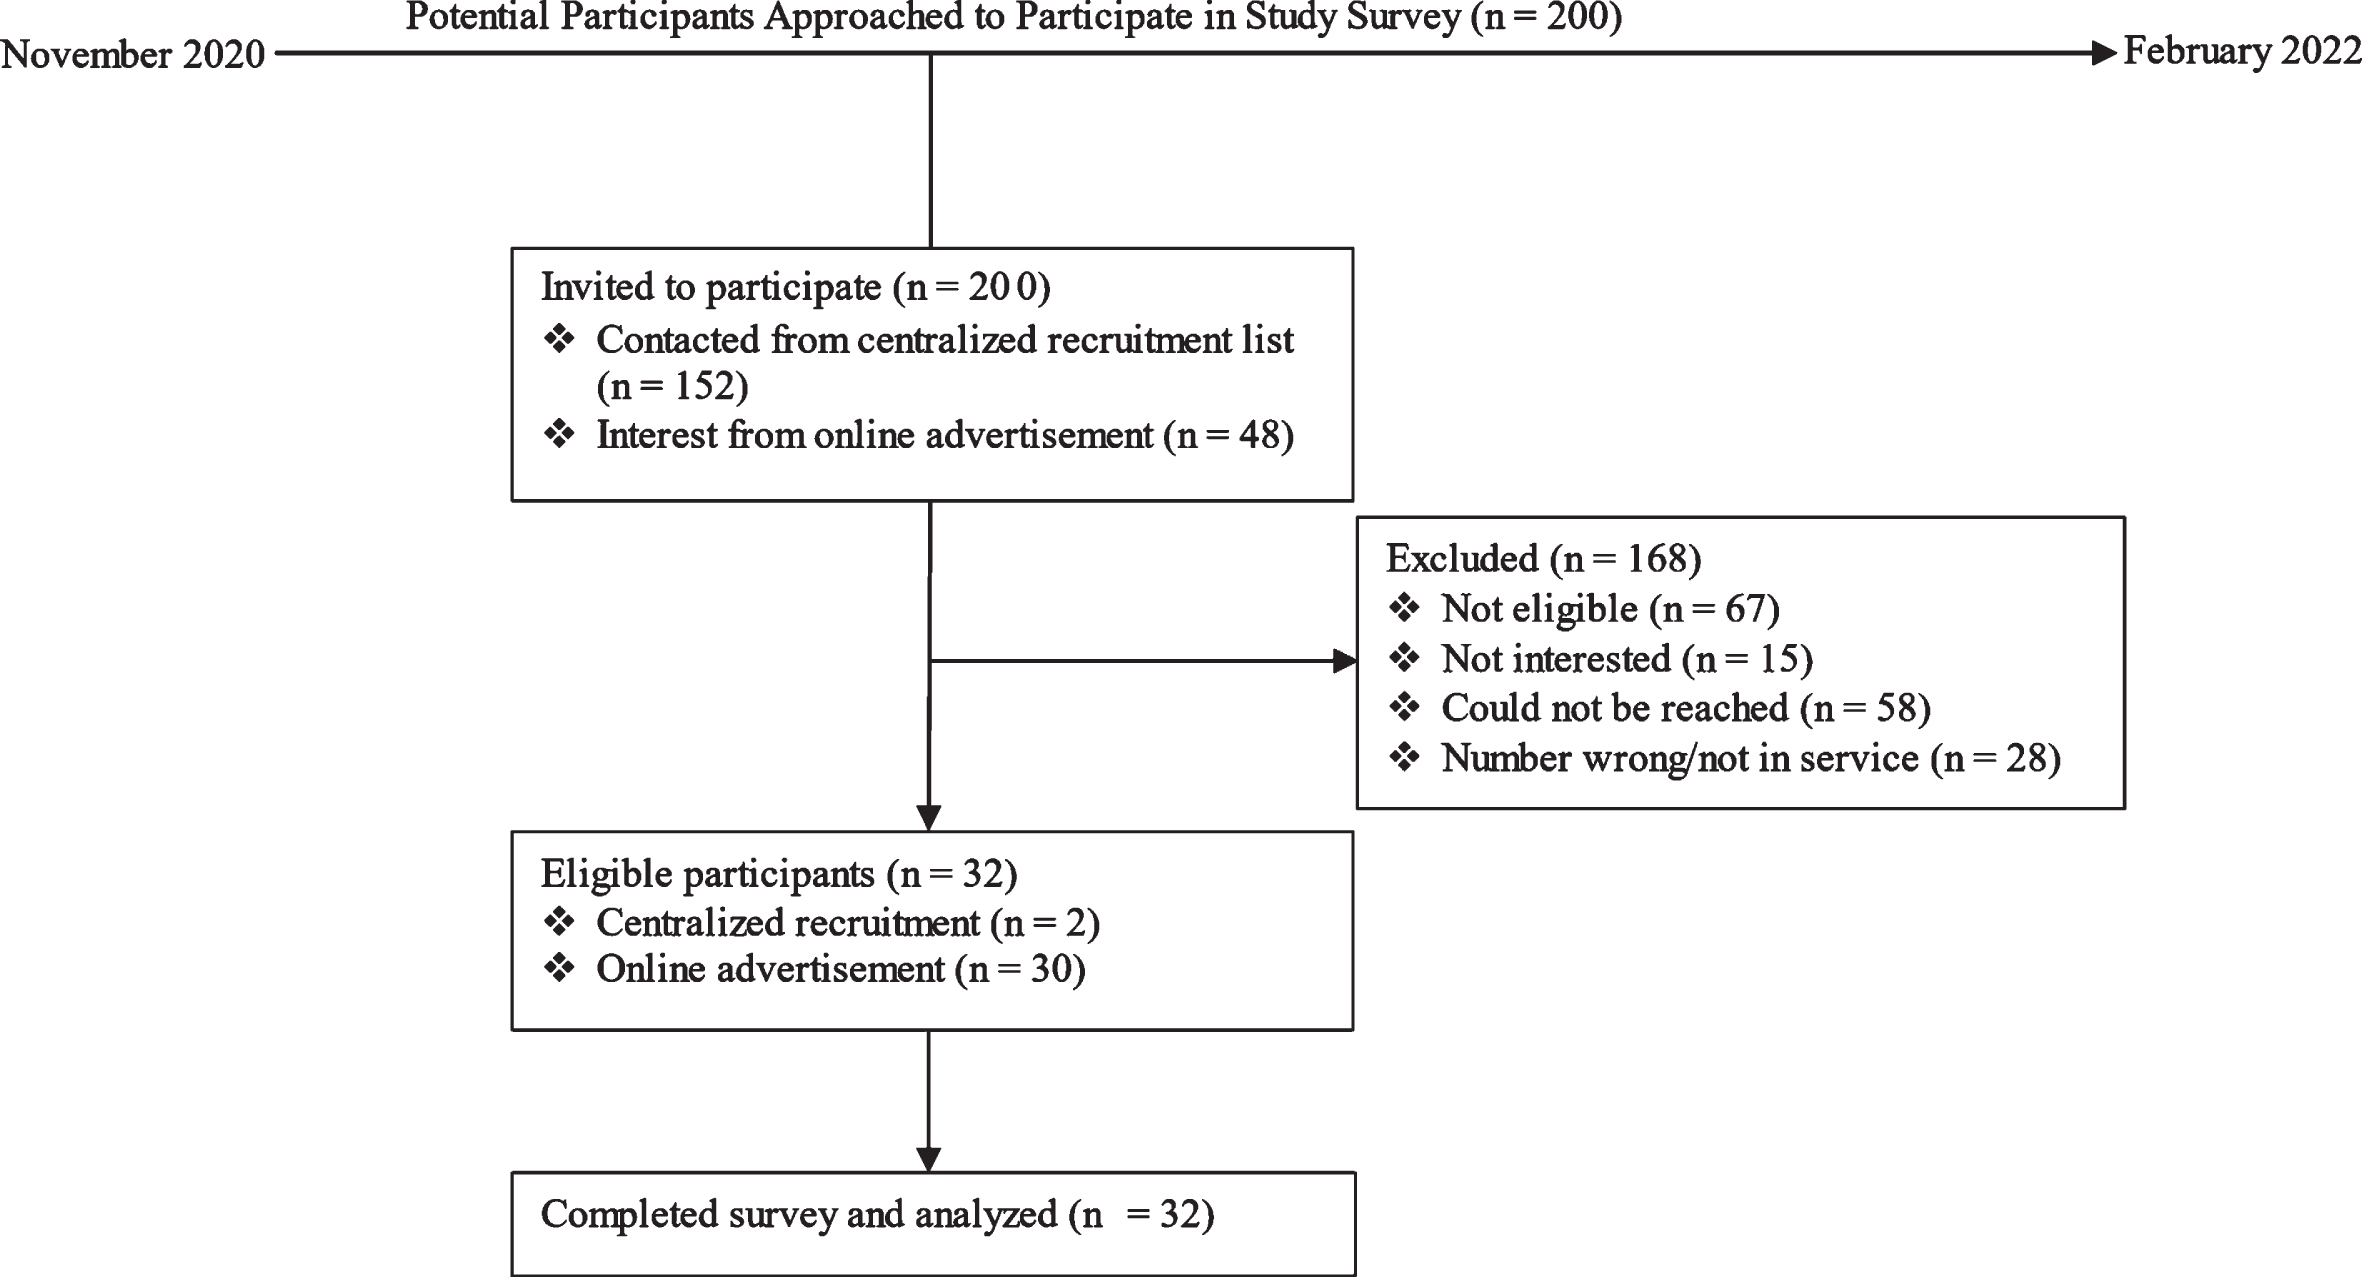 Flowchart of the total number of participants approached and eligible for survey completion.